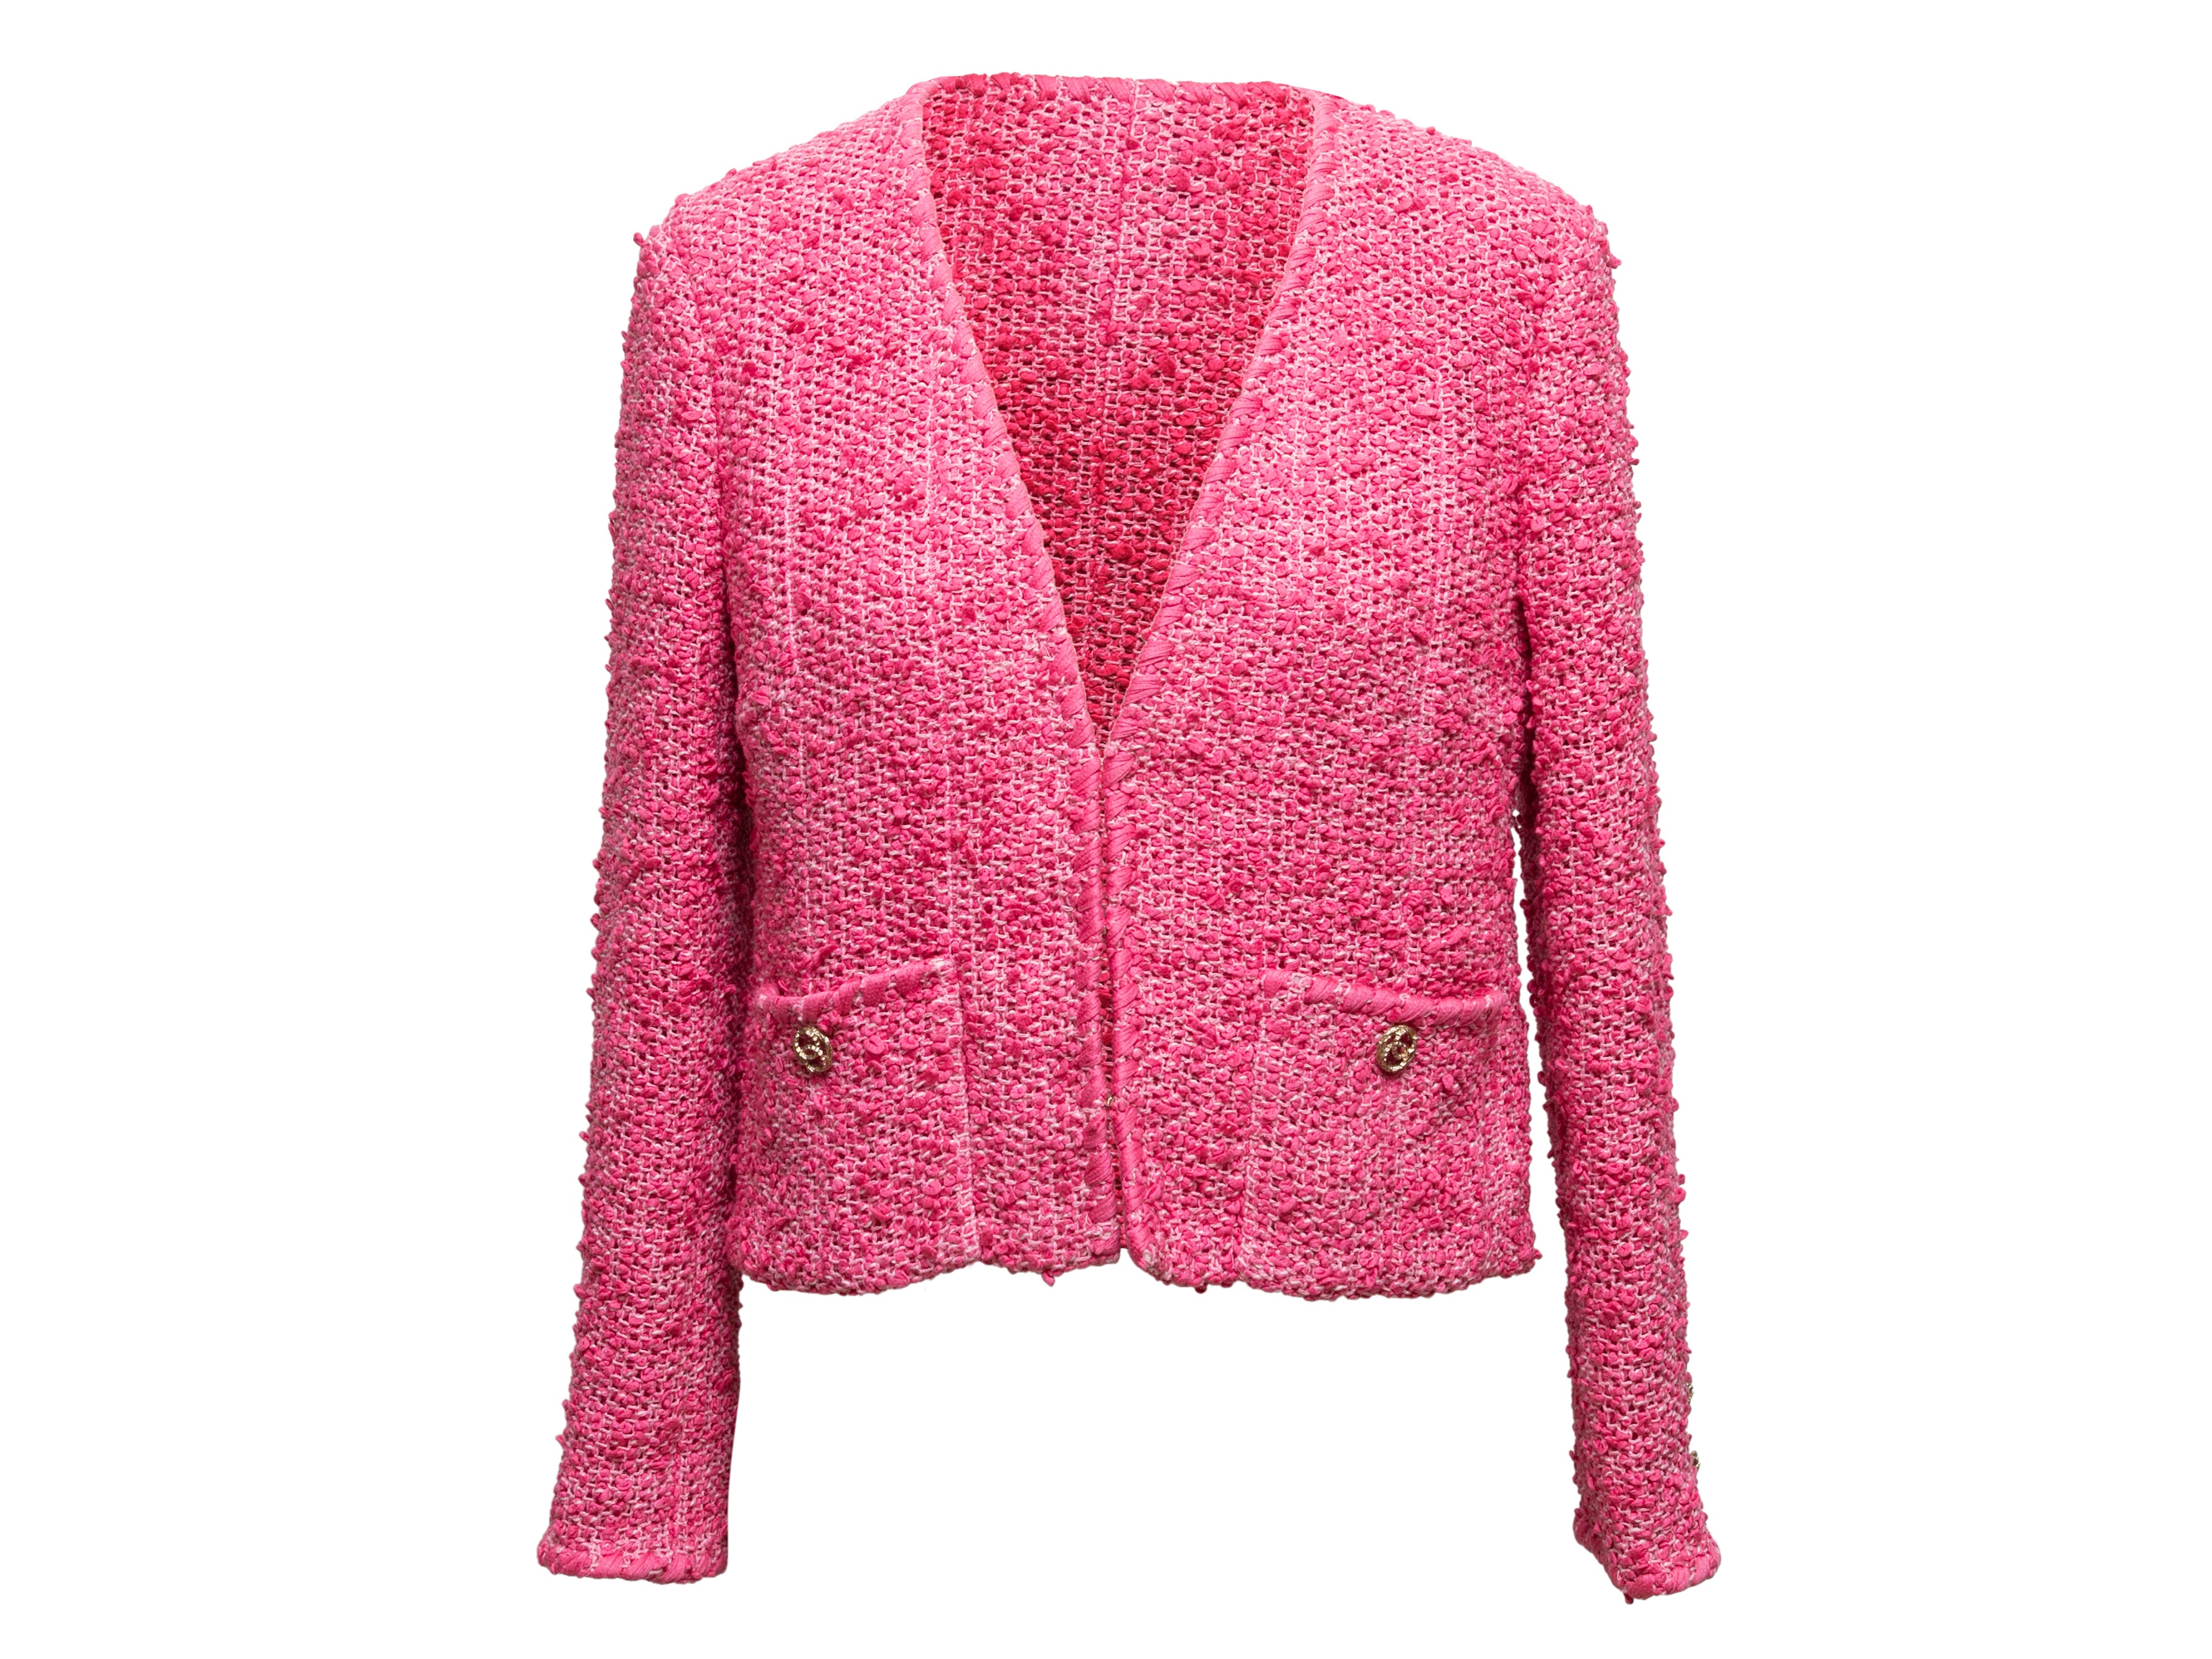 Chanel - Authenticated Jacket - Cotton Multicolour For Woman, Very Good Condition